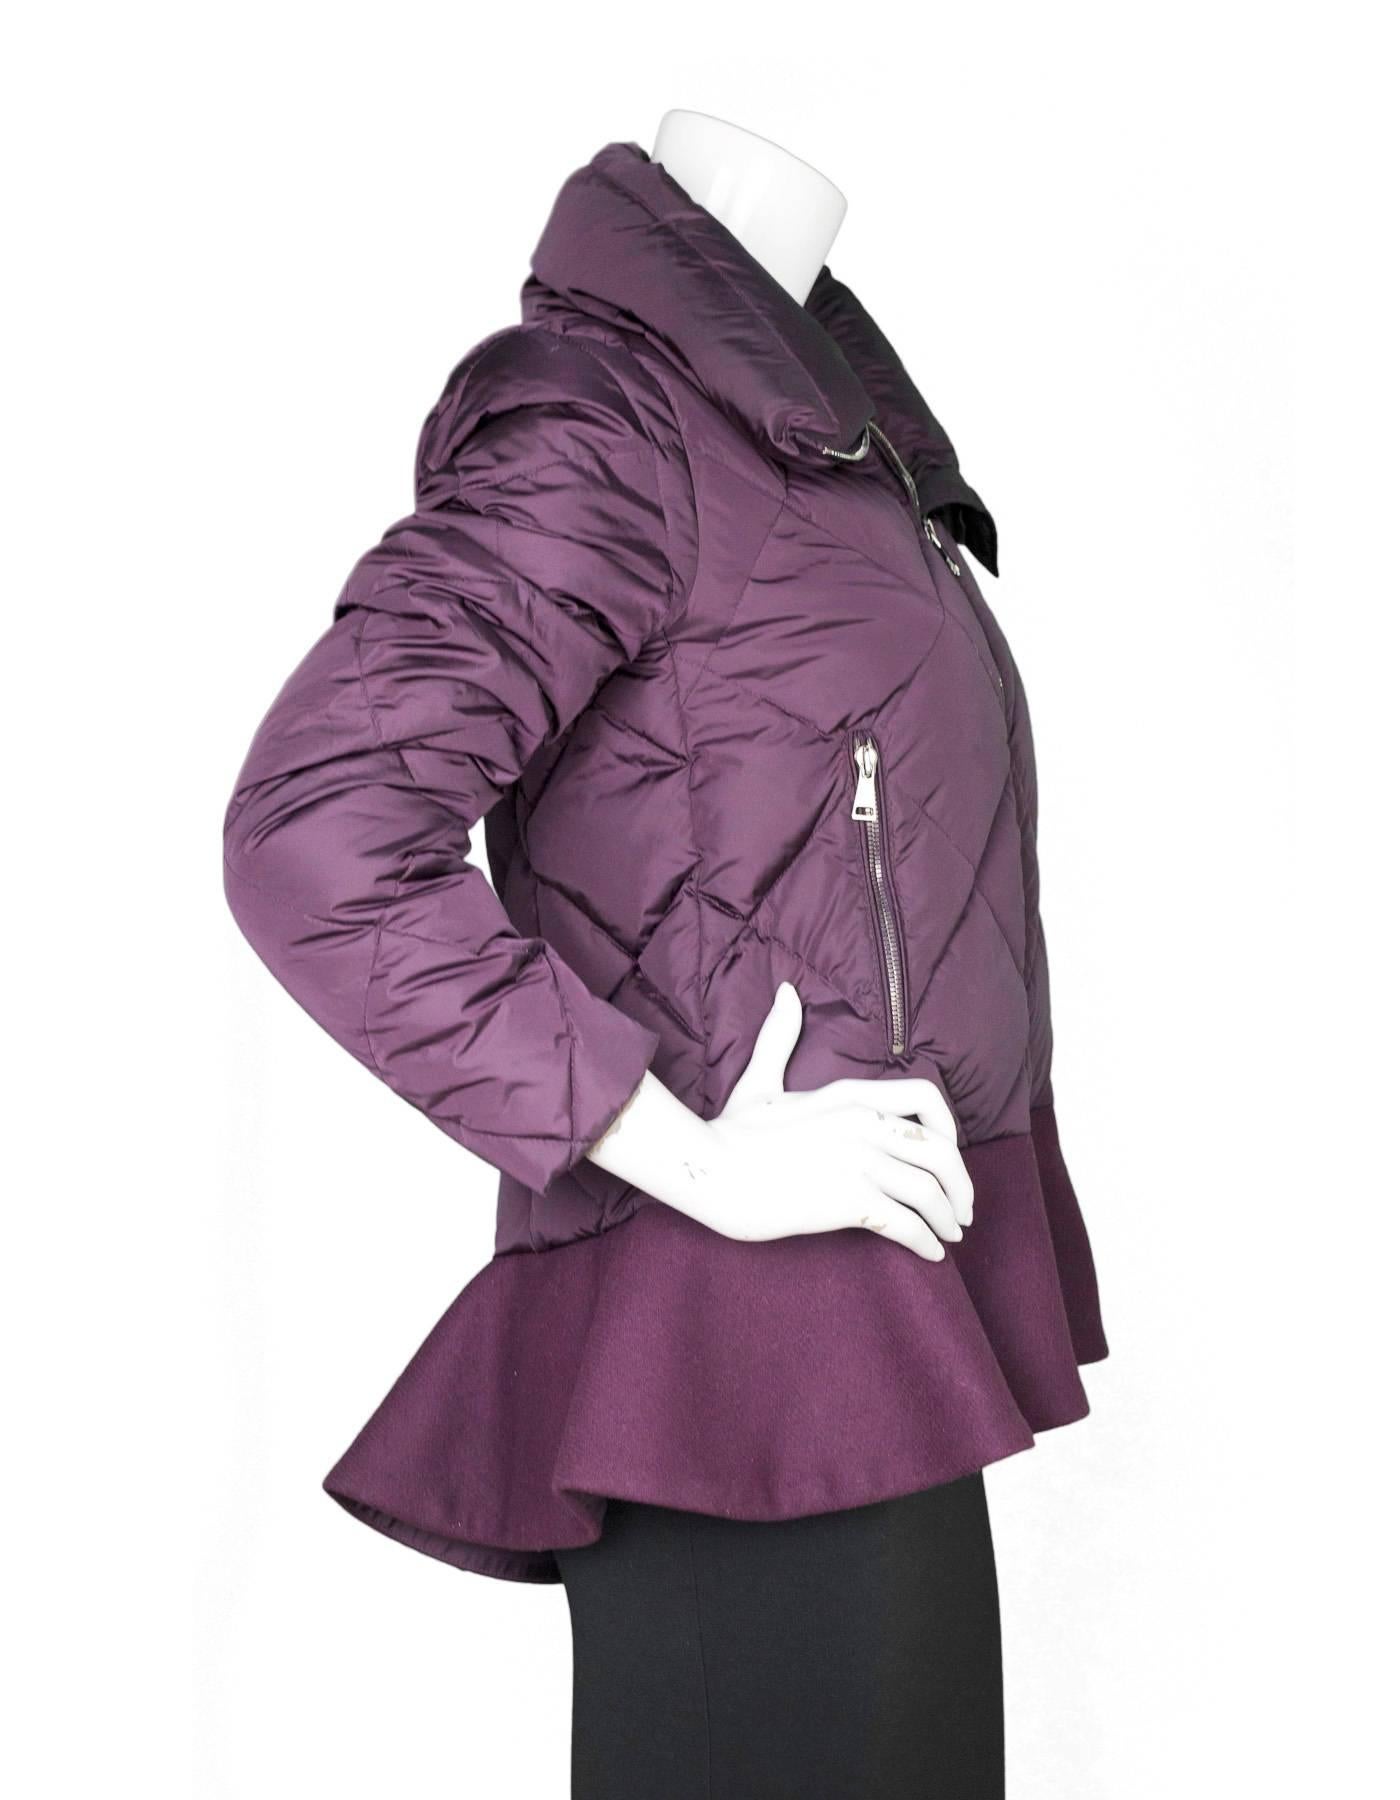 Moncler Eggplant Puffer Coat 
Features ruffle/peplum at bottom of coat.  Please note this style was not made with the Moncler patch on the sleeve or the cartoon to the interior.

Made In: Hungary
Color: Eggplant
Composition: 100% Polyamide
Lining: